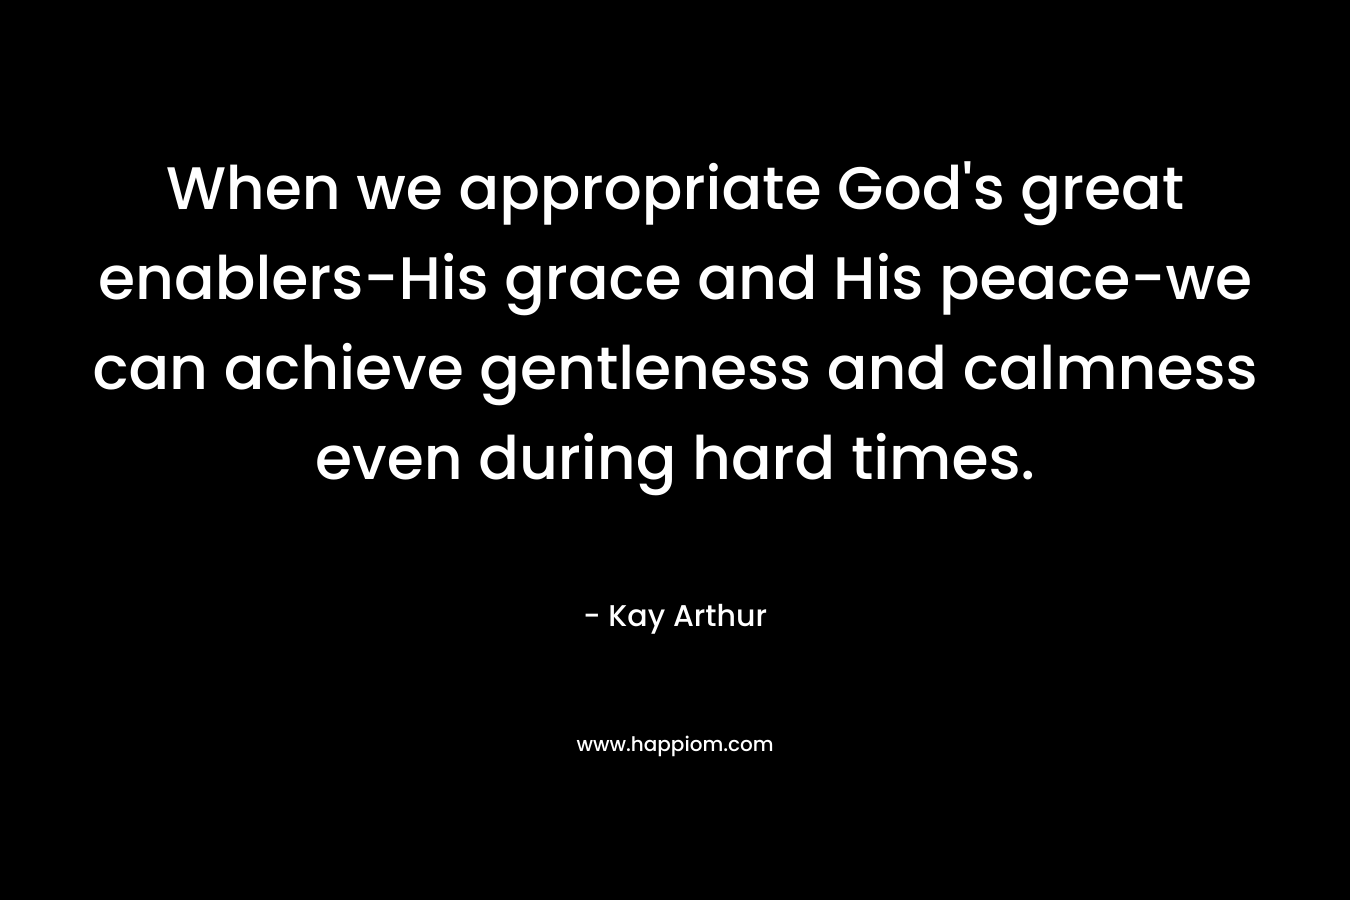 When we appropriate God’s great enablers-His grace and His peace-we can achieve gentleness and calmness even during hard times. – Kay Arthur